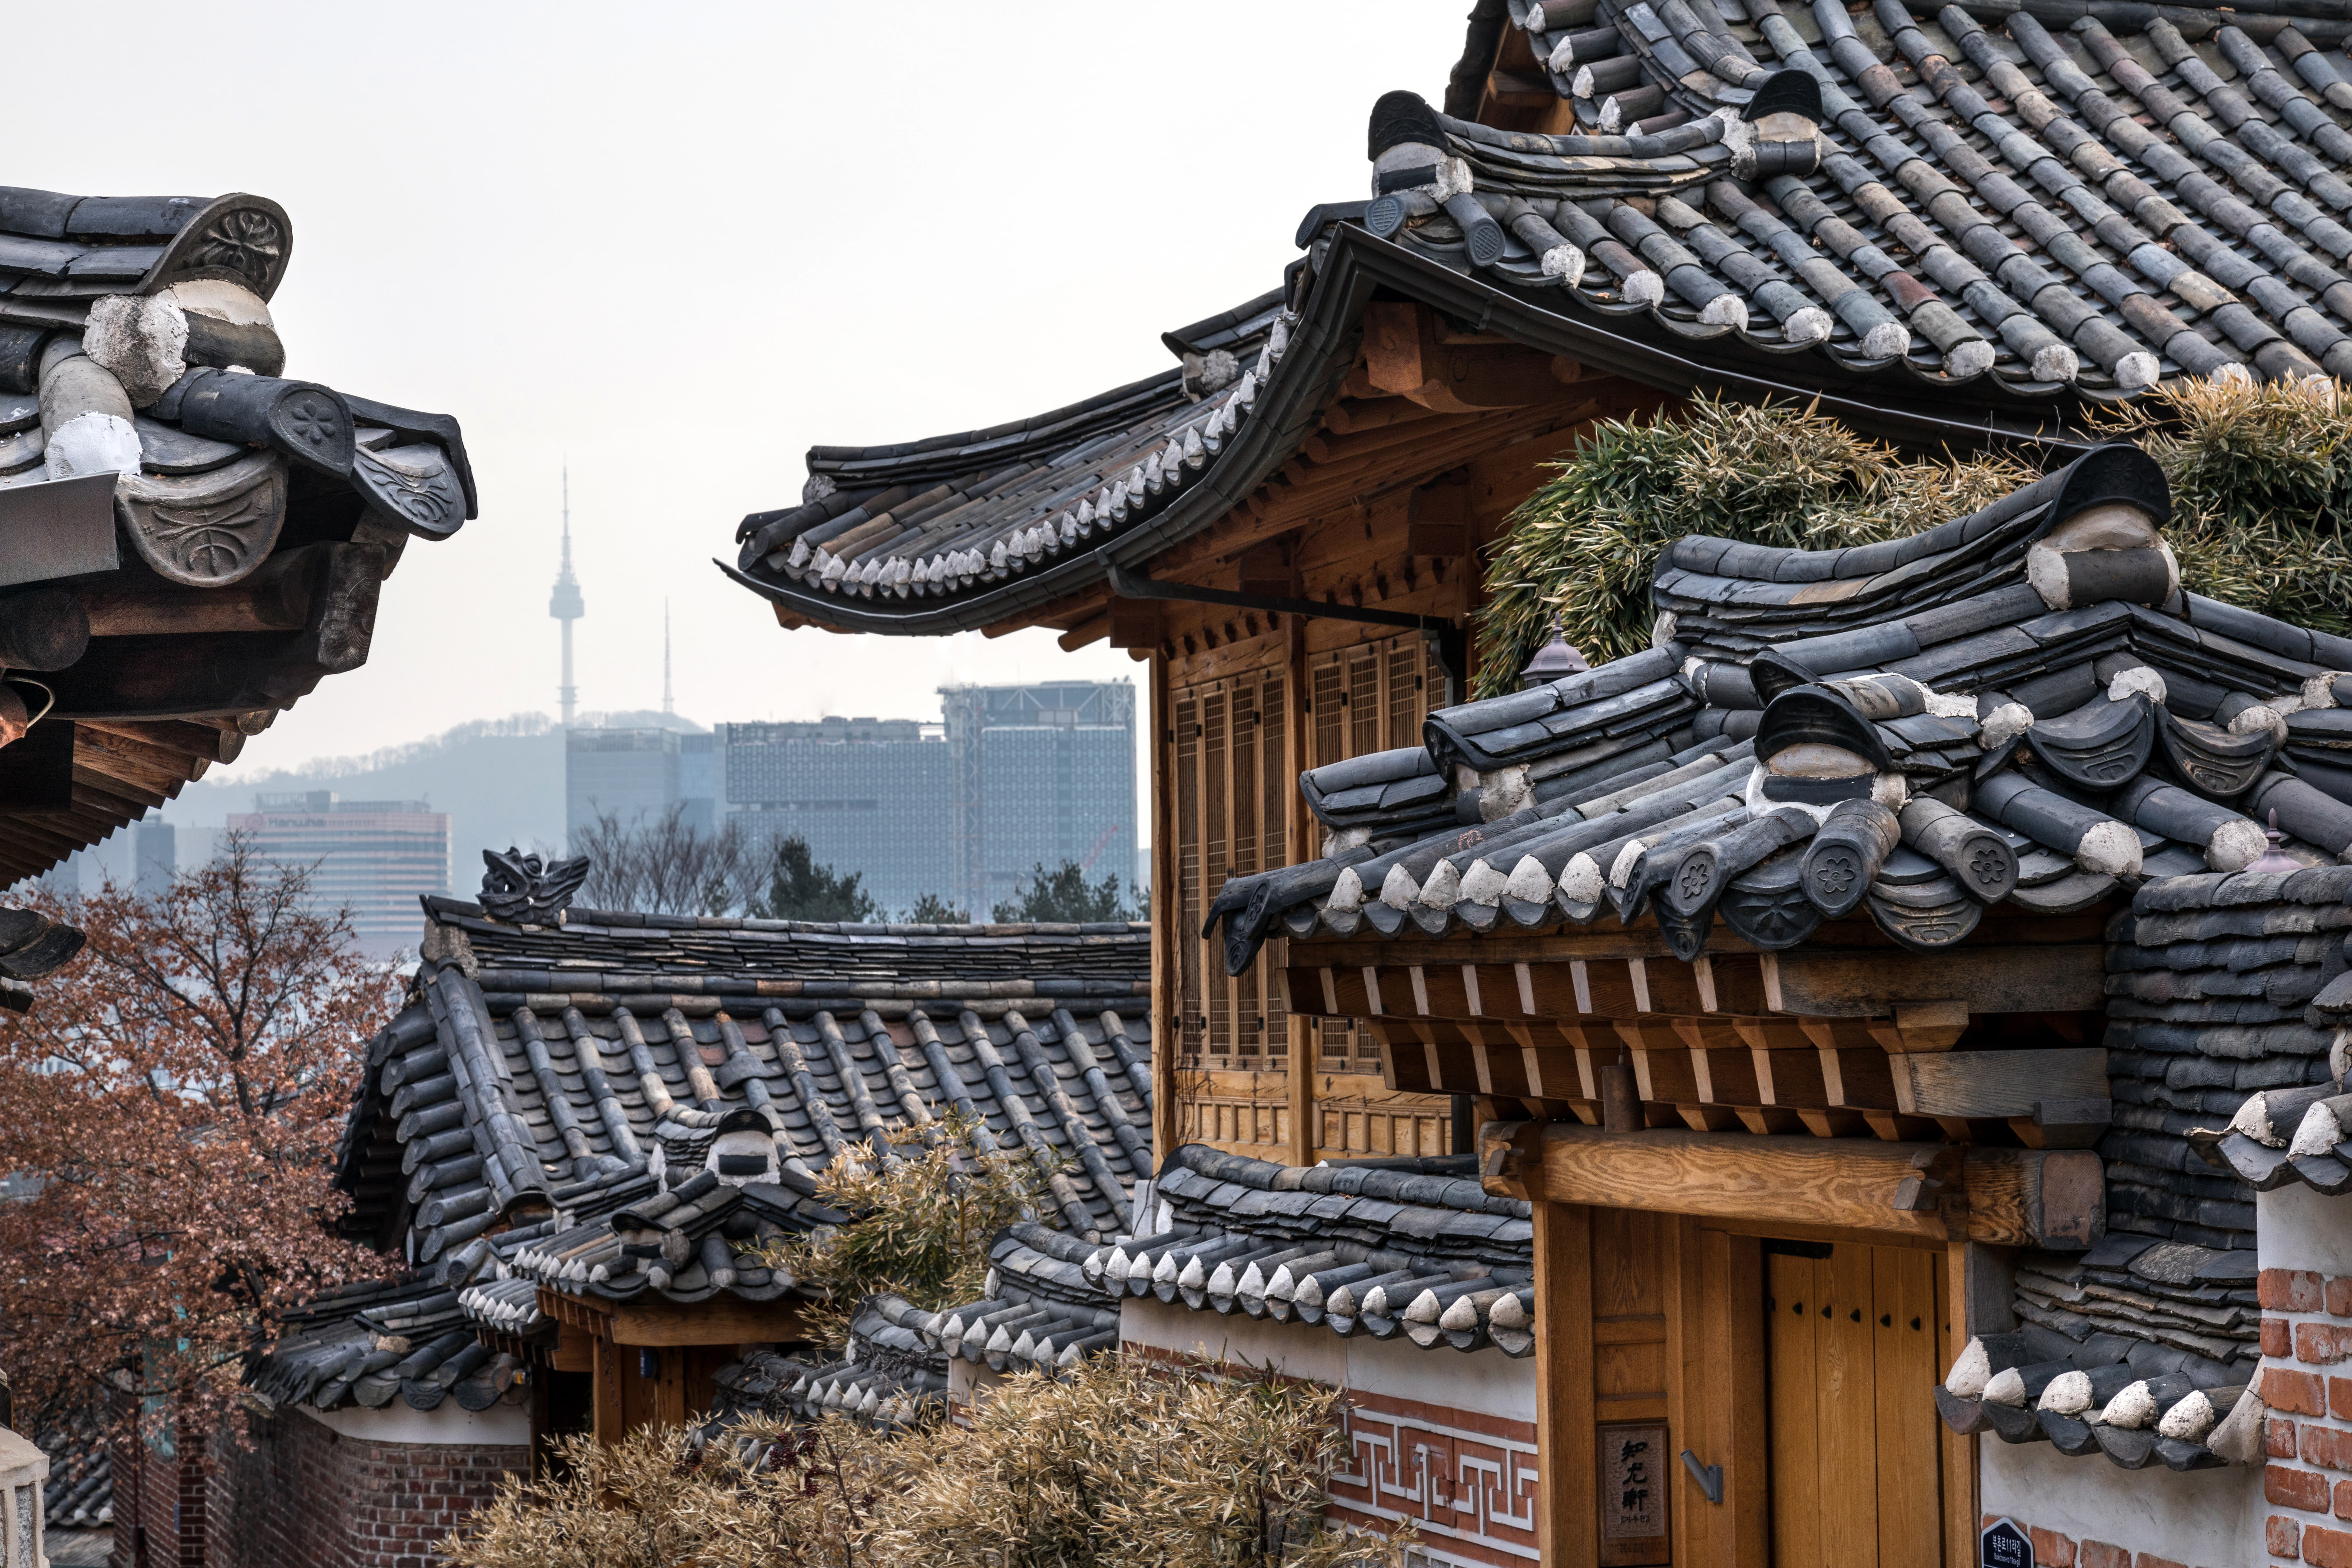 Bukchon Hanok Village6 : Bukchon Hanok Village with a view of N Seoul Tower and the city itself